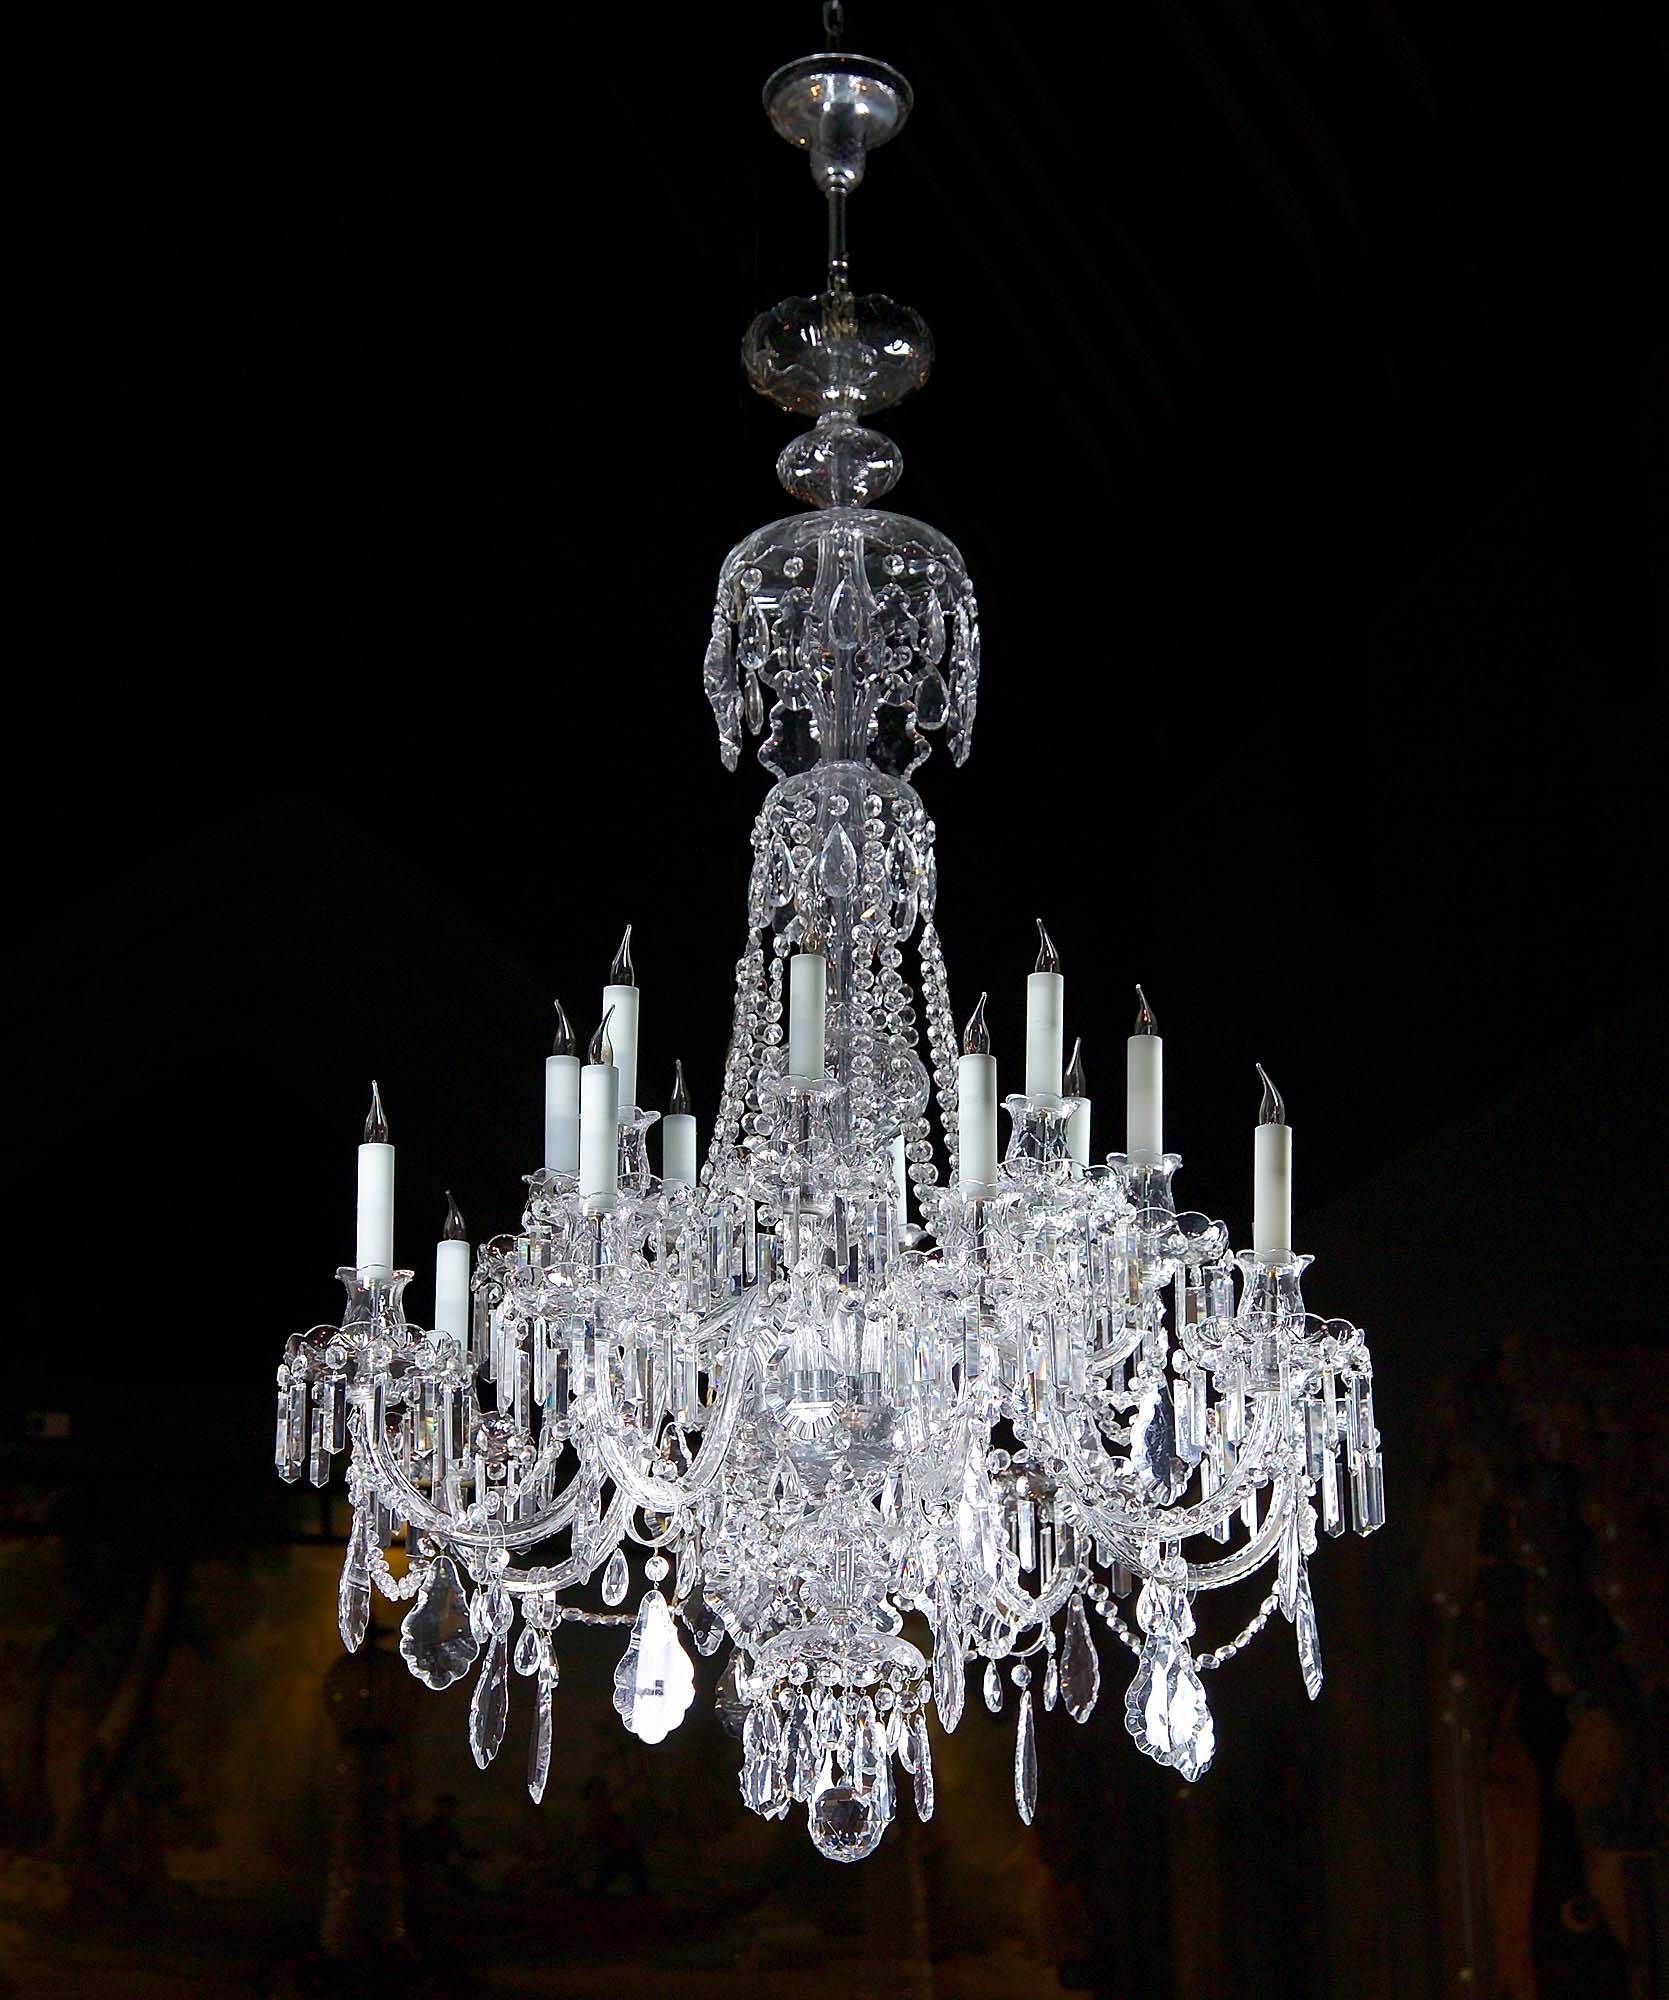 Antique Georgian Chandelier In A Neo Classical Style Neo Throughout Georgian Chandeliers (View 7 of 15)